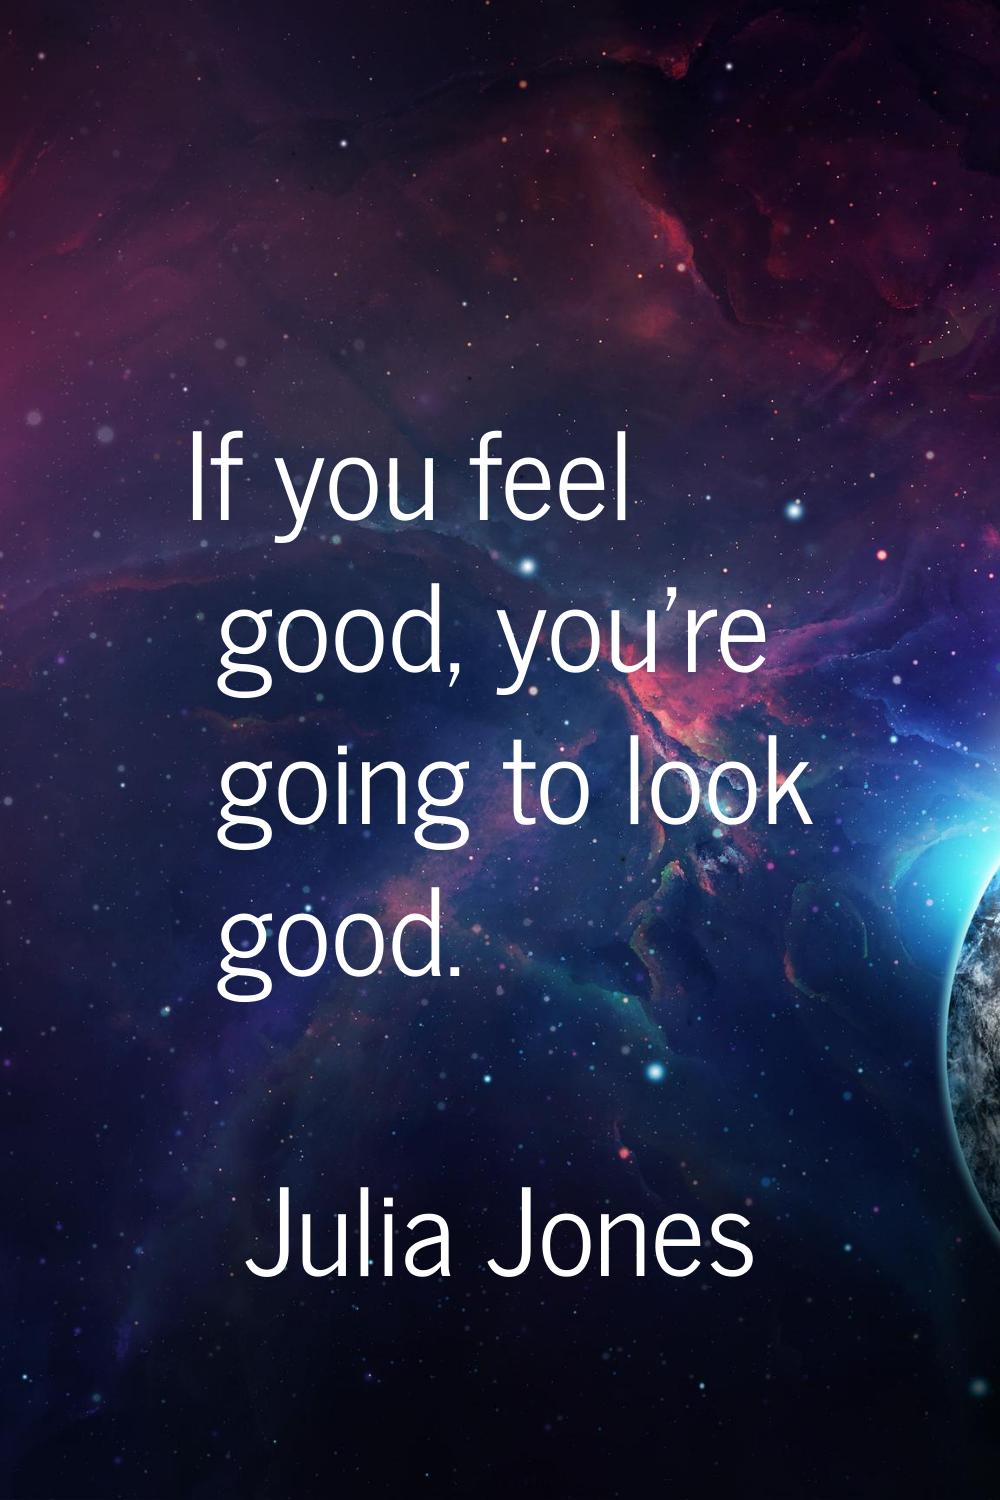 If you feel good, you're going to look good.